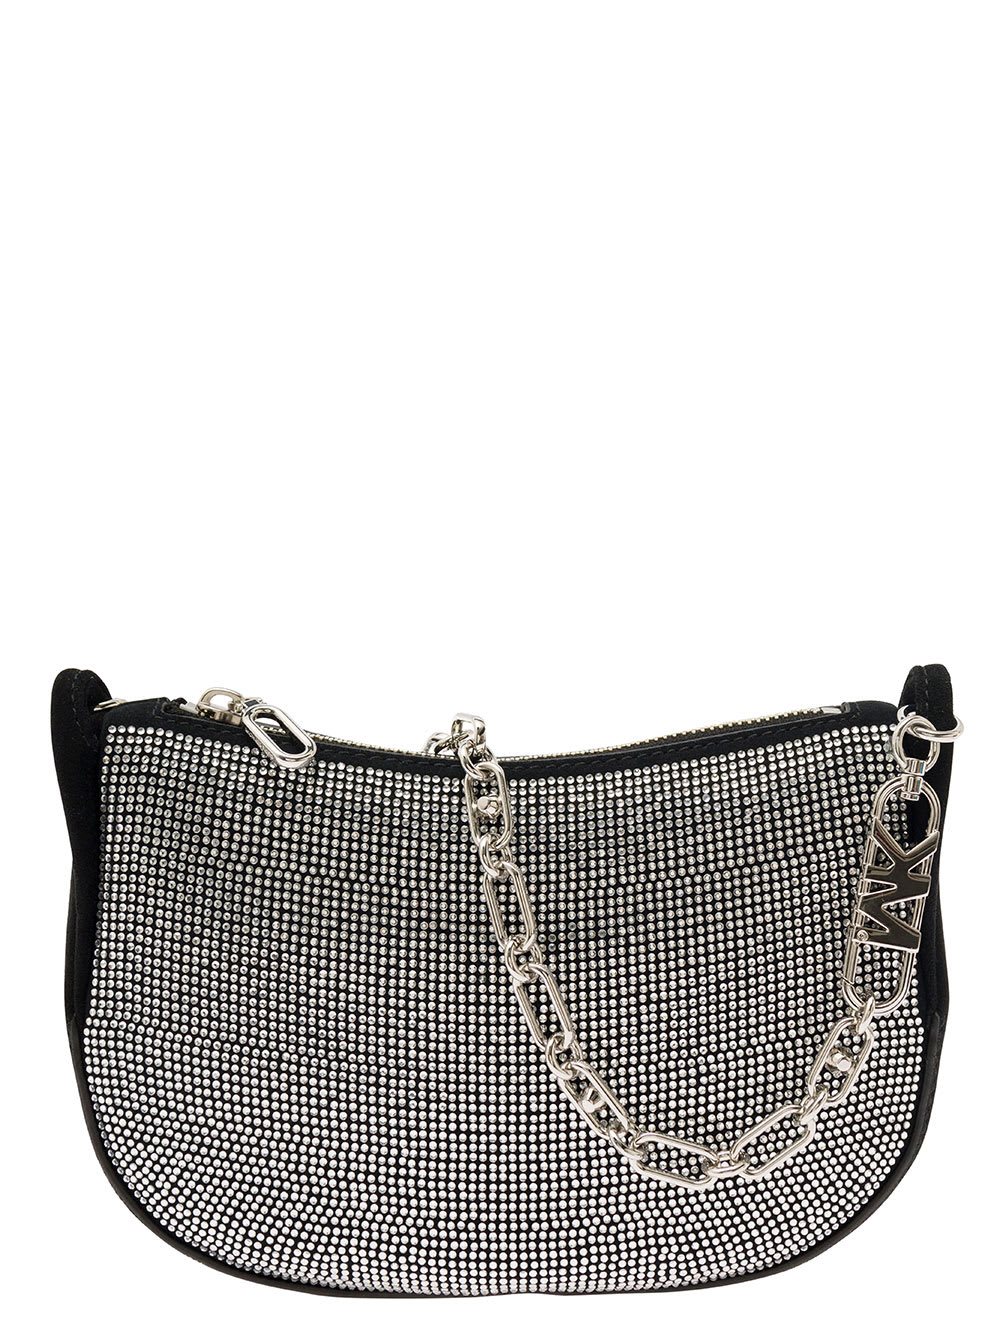 MICHAEL MICHAEL KORS BRACELET POUCH BLACK HANDBAG WITH ALL-OVER RHINESTONE AND BRANDED CHAIN IN FABRIC WOMAN